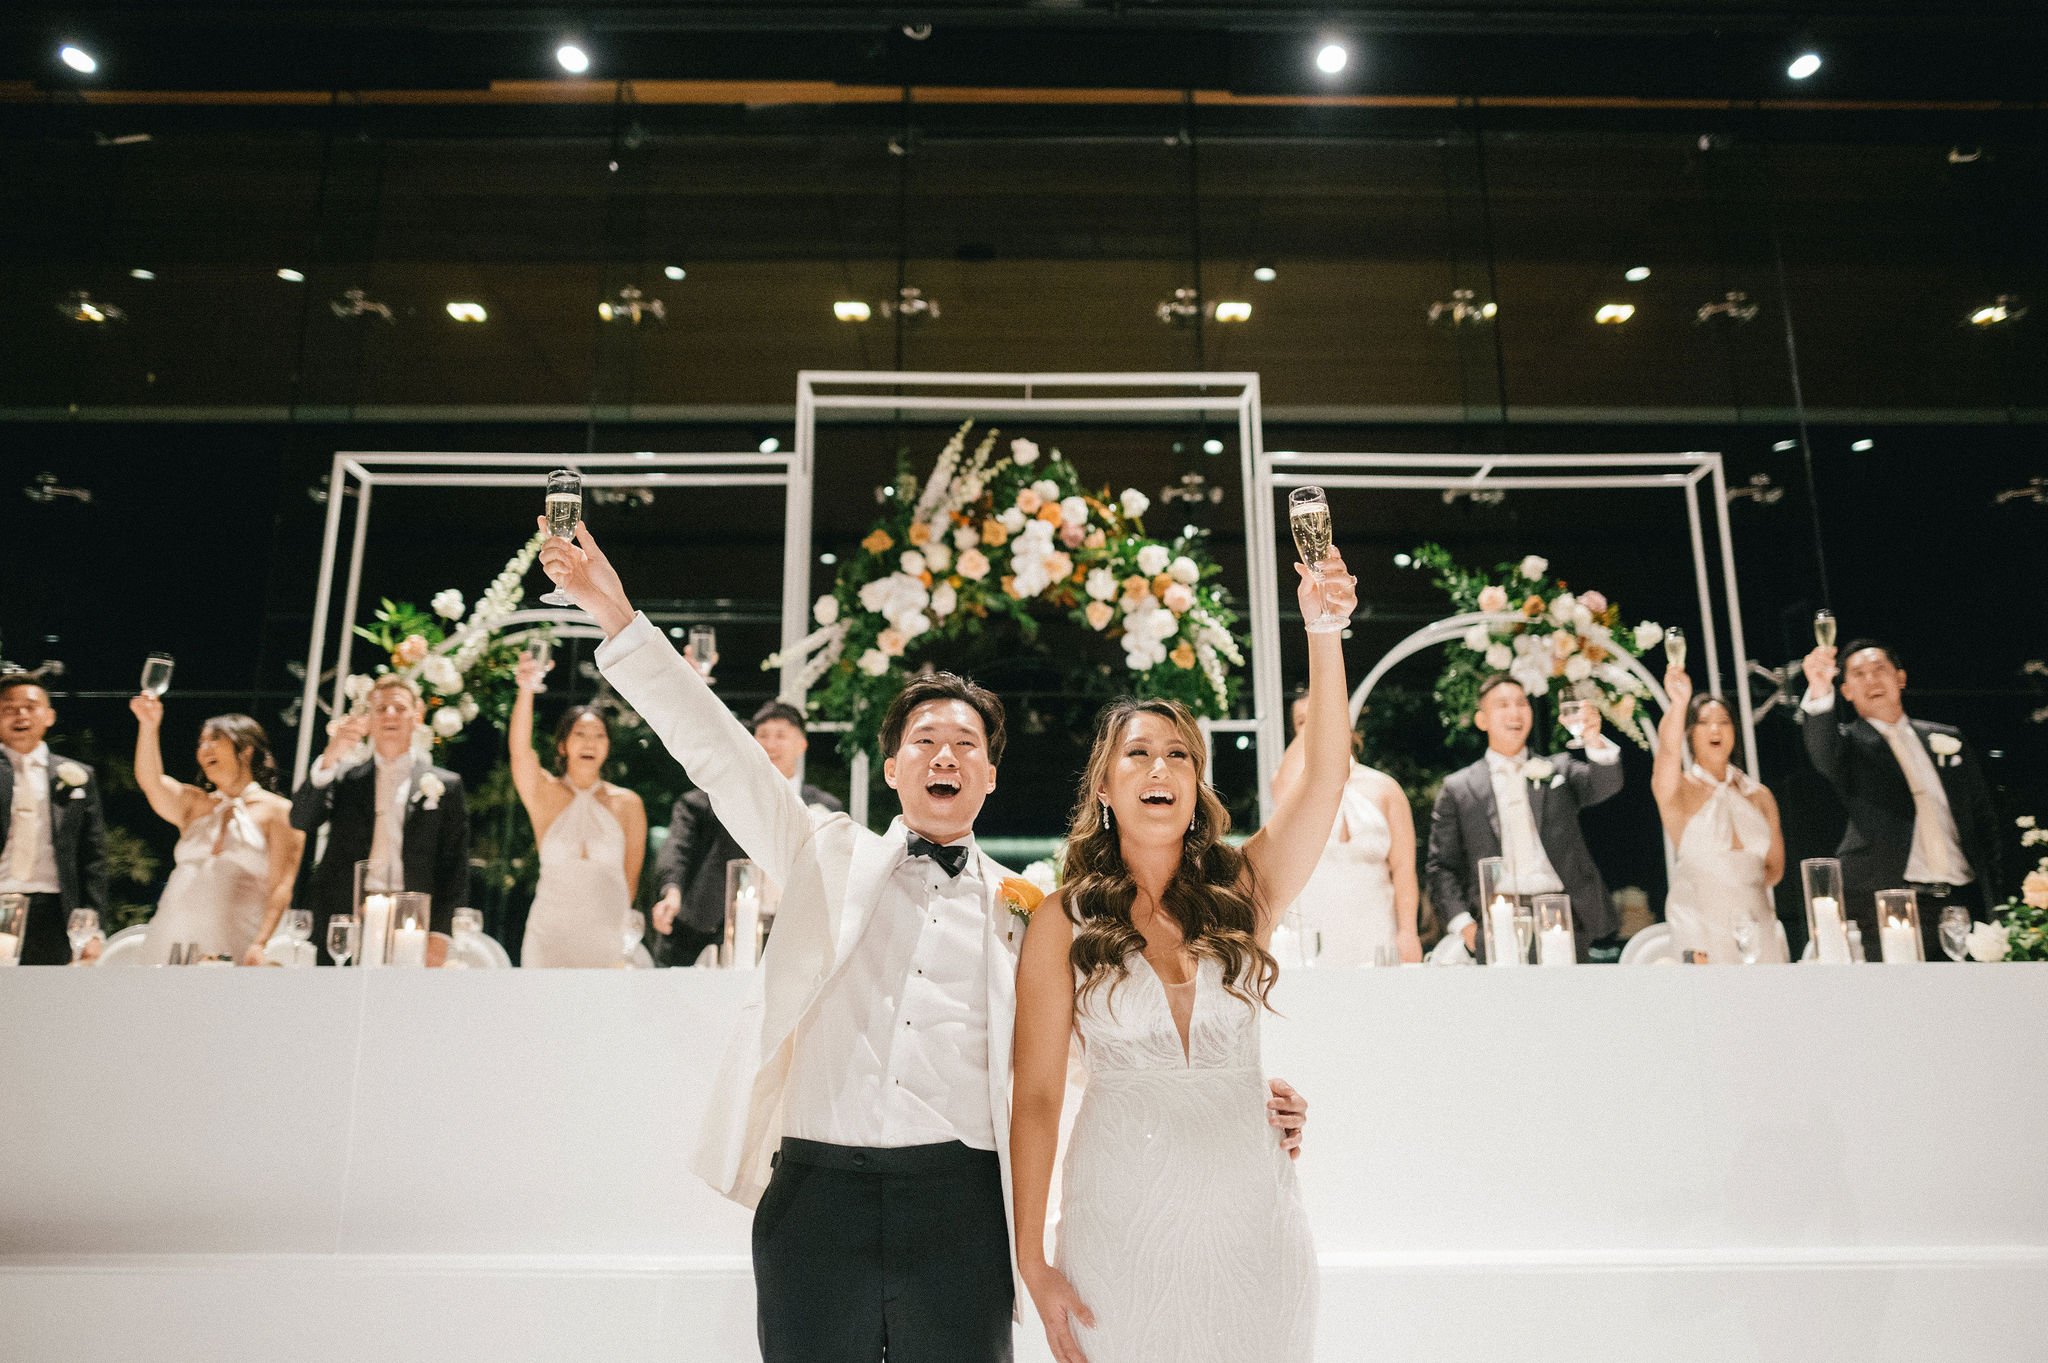 A few days late, but happy anniversary to these two legends who tied the knot this time last year at @joondalupresortweddings 

A stunning ballroom set up with white gloss, pops of orange, lots of candles, and an absolute banger of a dance floor to f